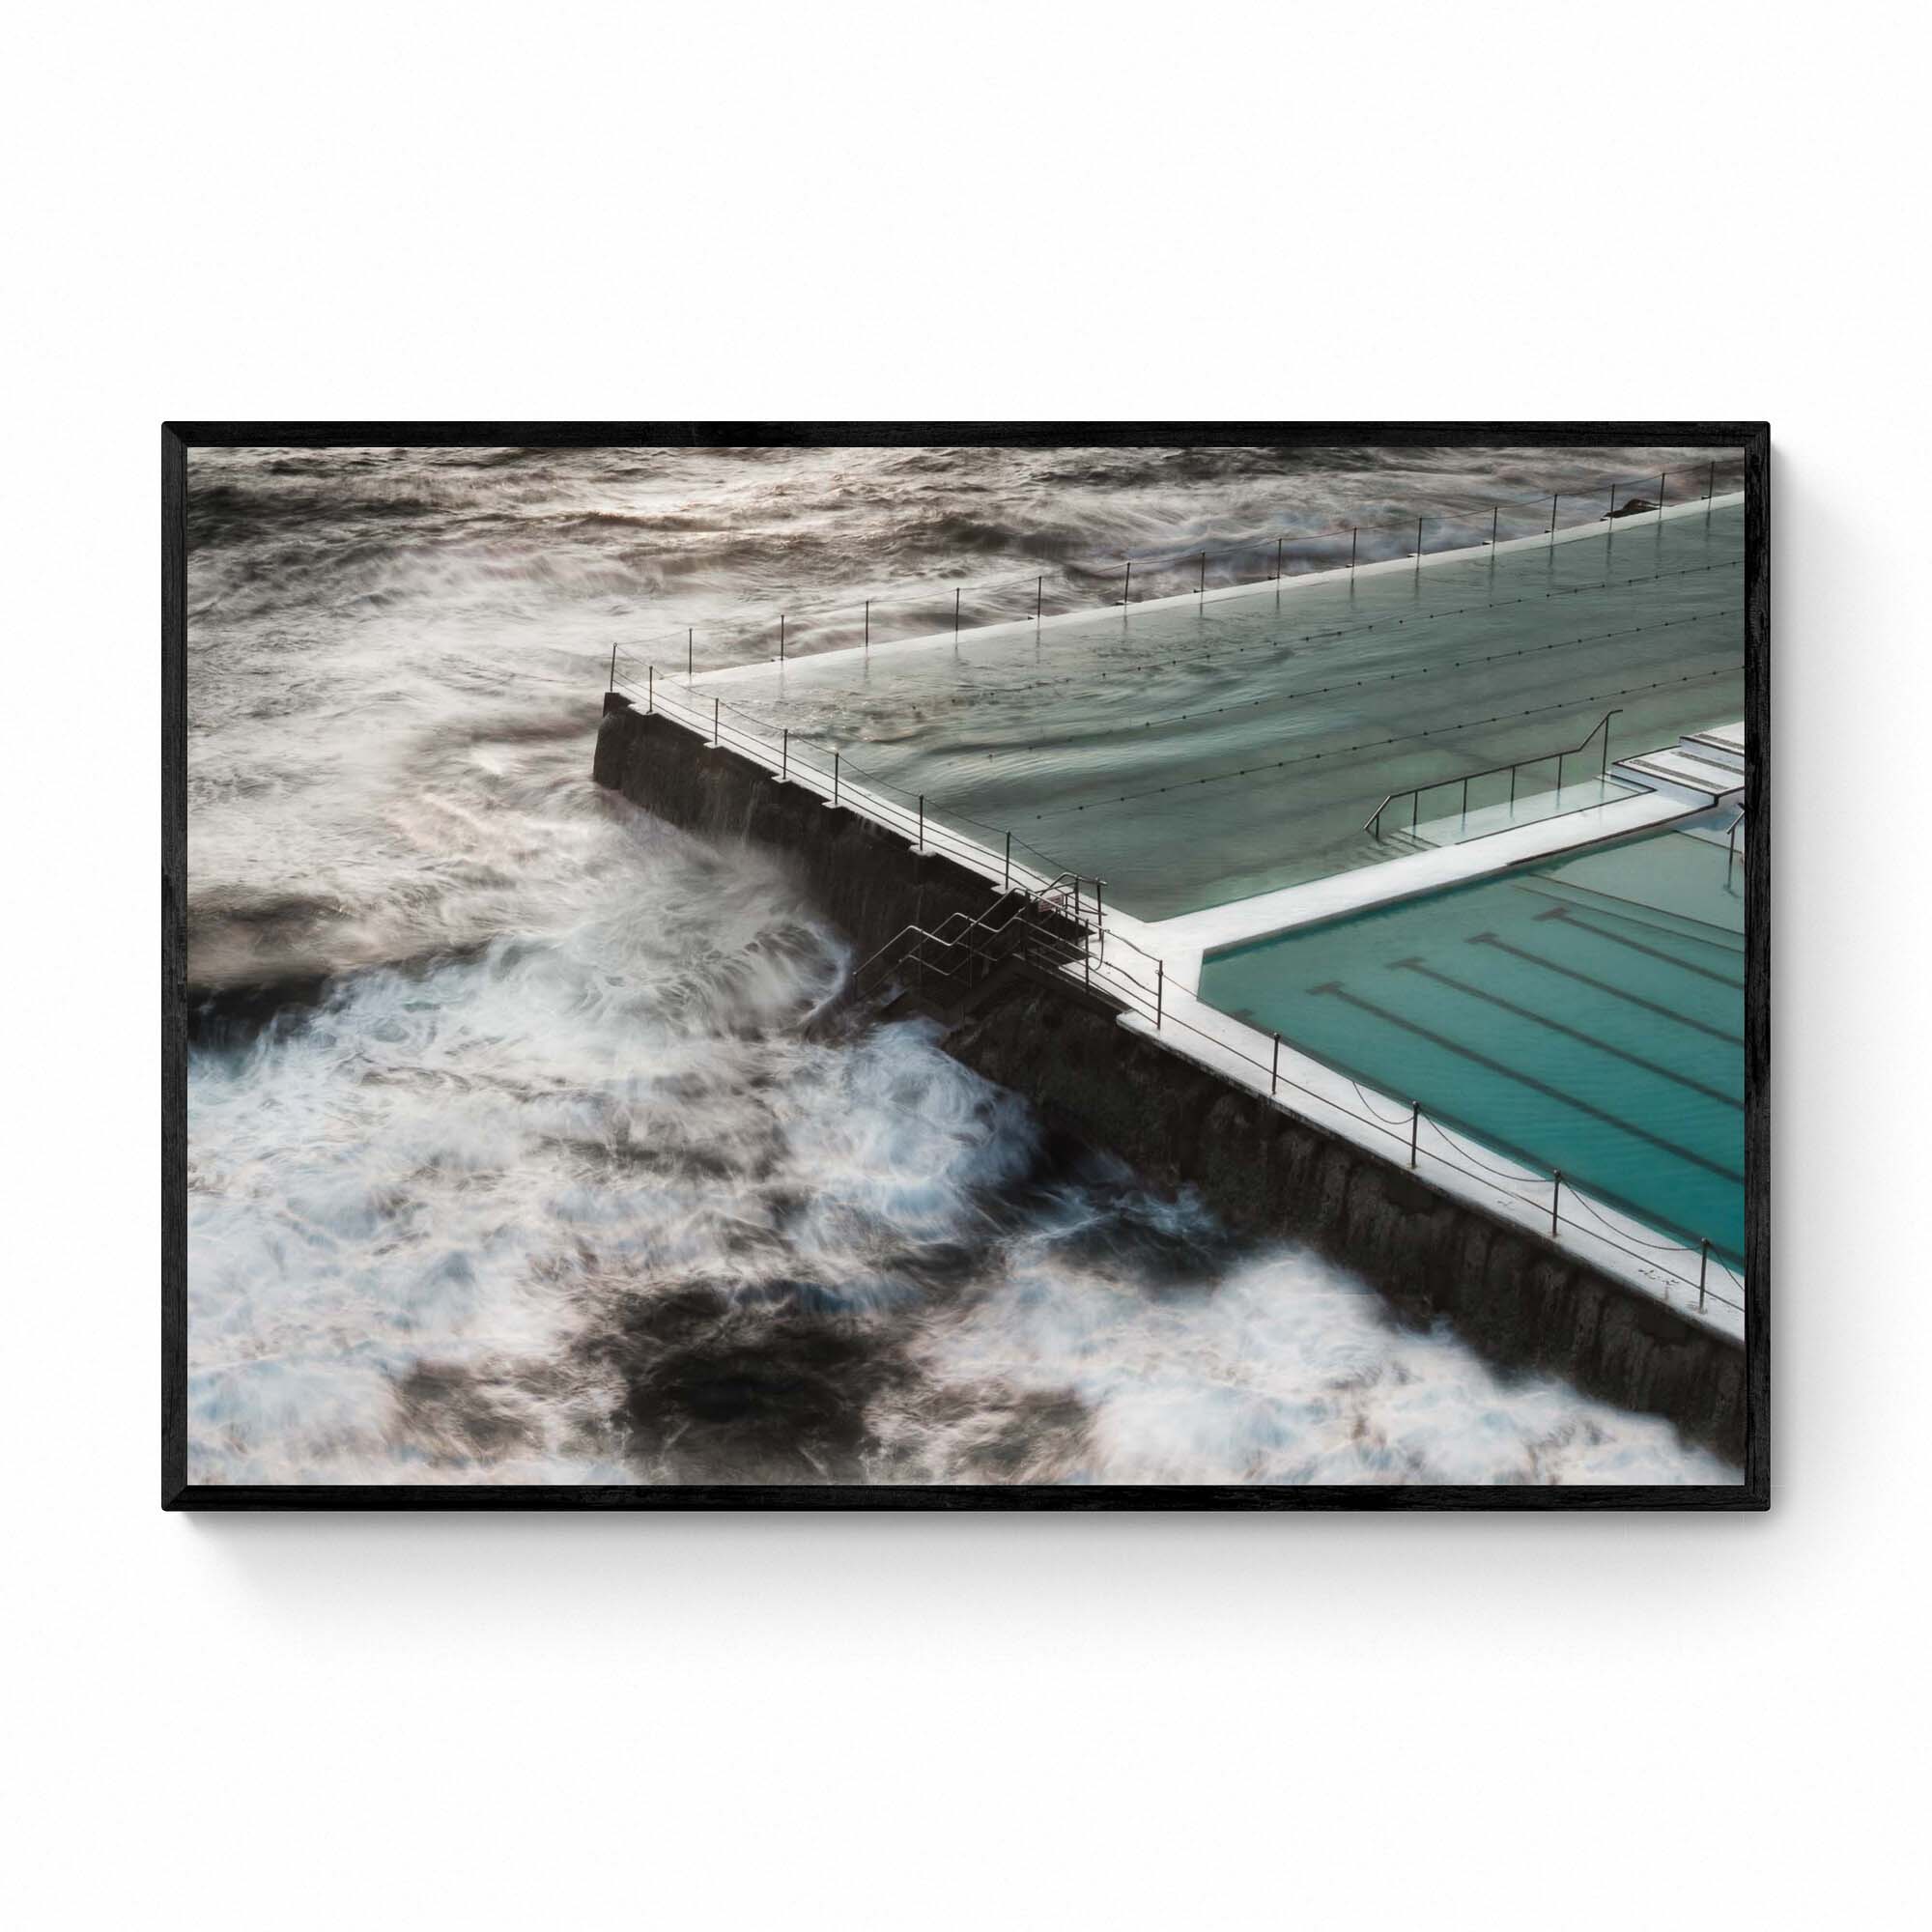 Long exposure of the Bondi Rock Pool in Sydney, with swirling ocean waves surrounding the calm waters of the pool.